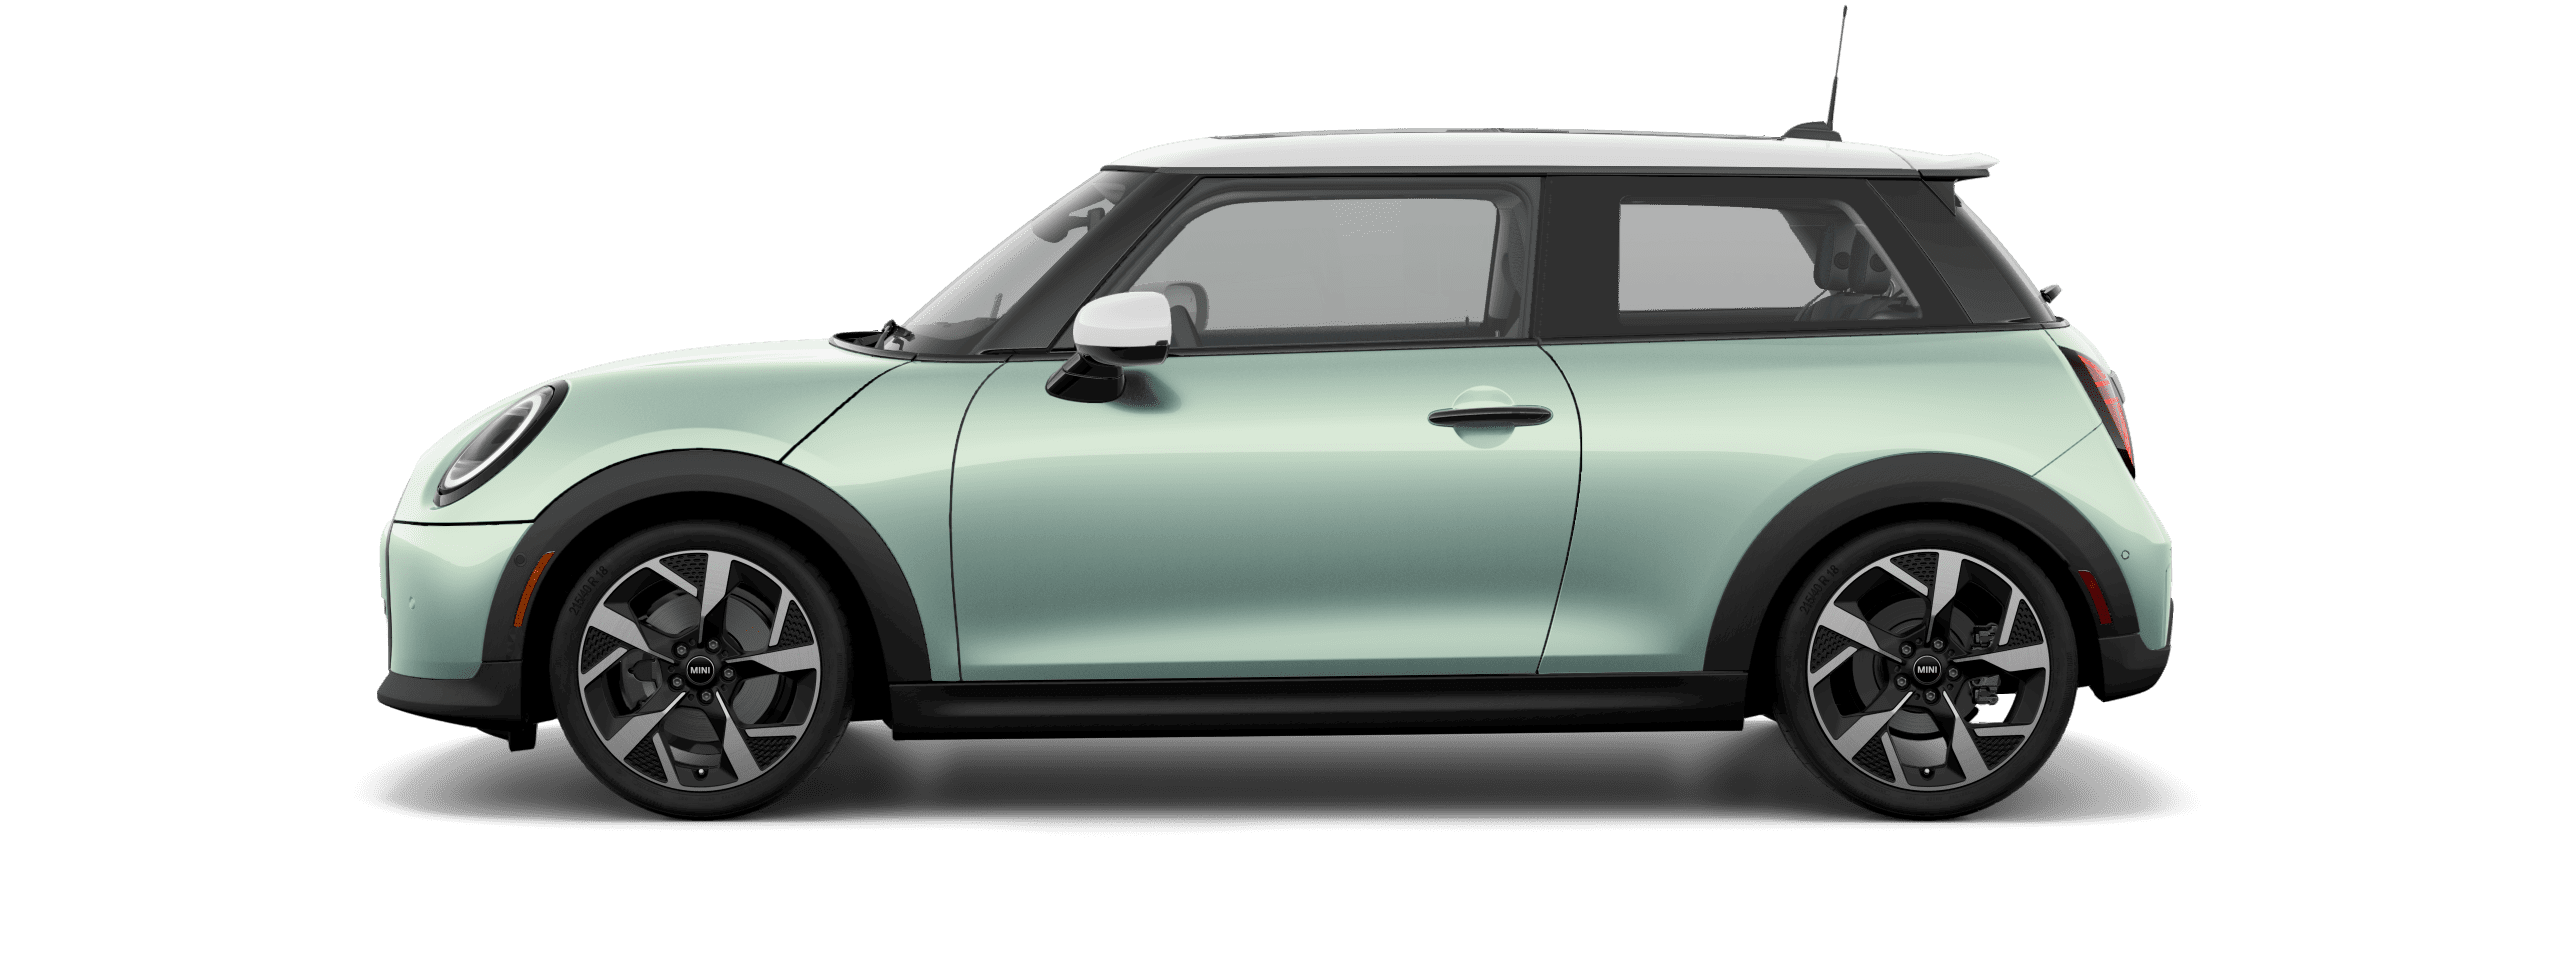 Side view of a 2025 MINI Cooper S 2 Door in the Ocean Wave Green body color, facing left with its shadow underneath it.